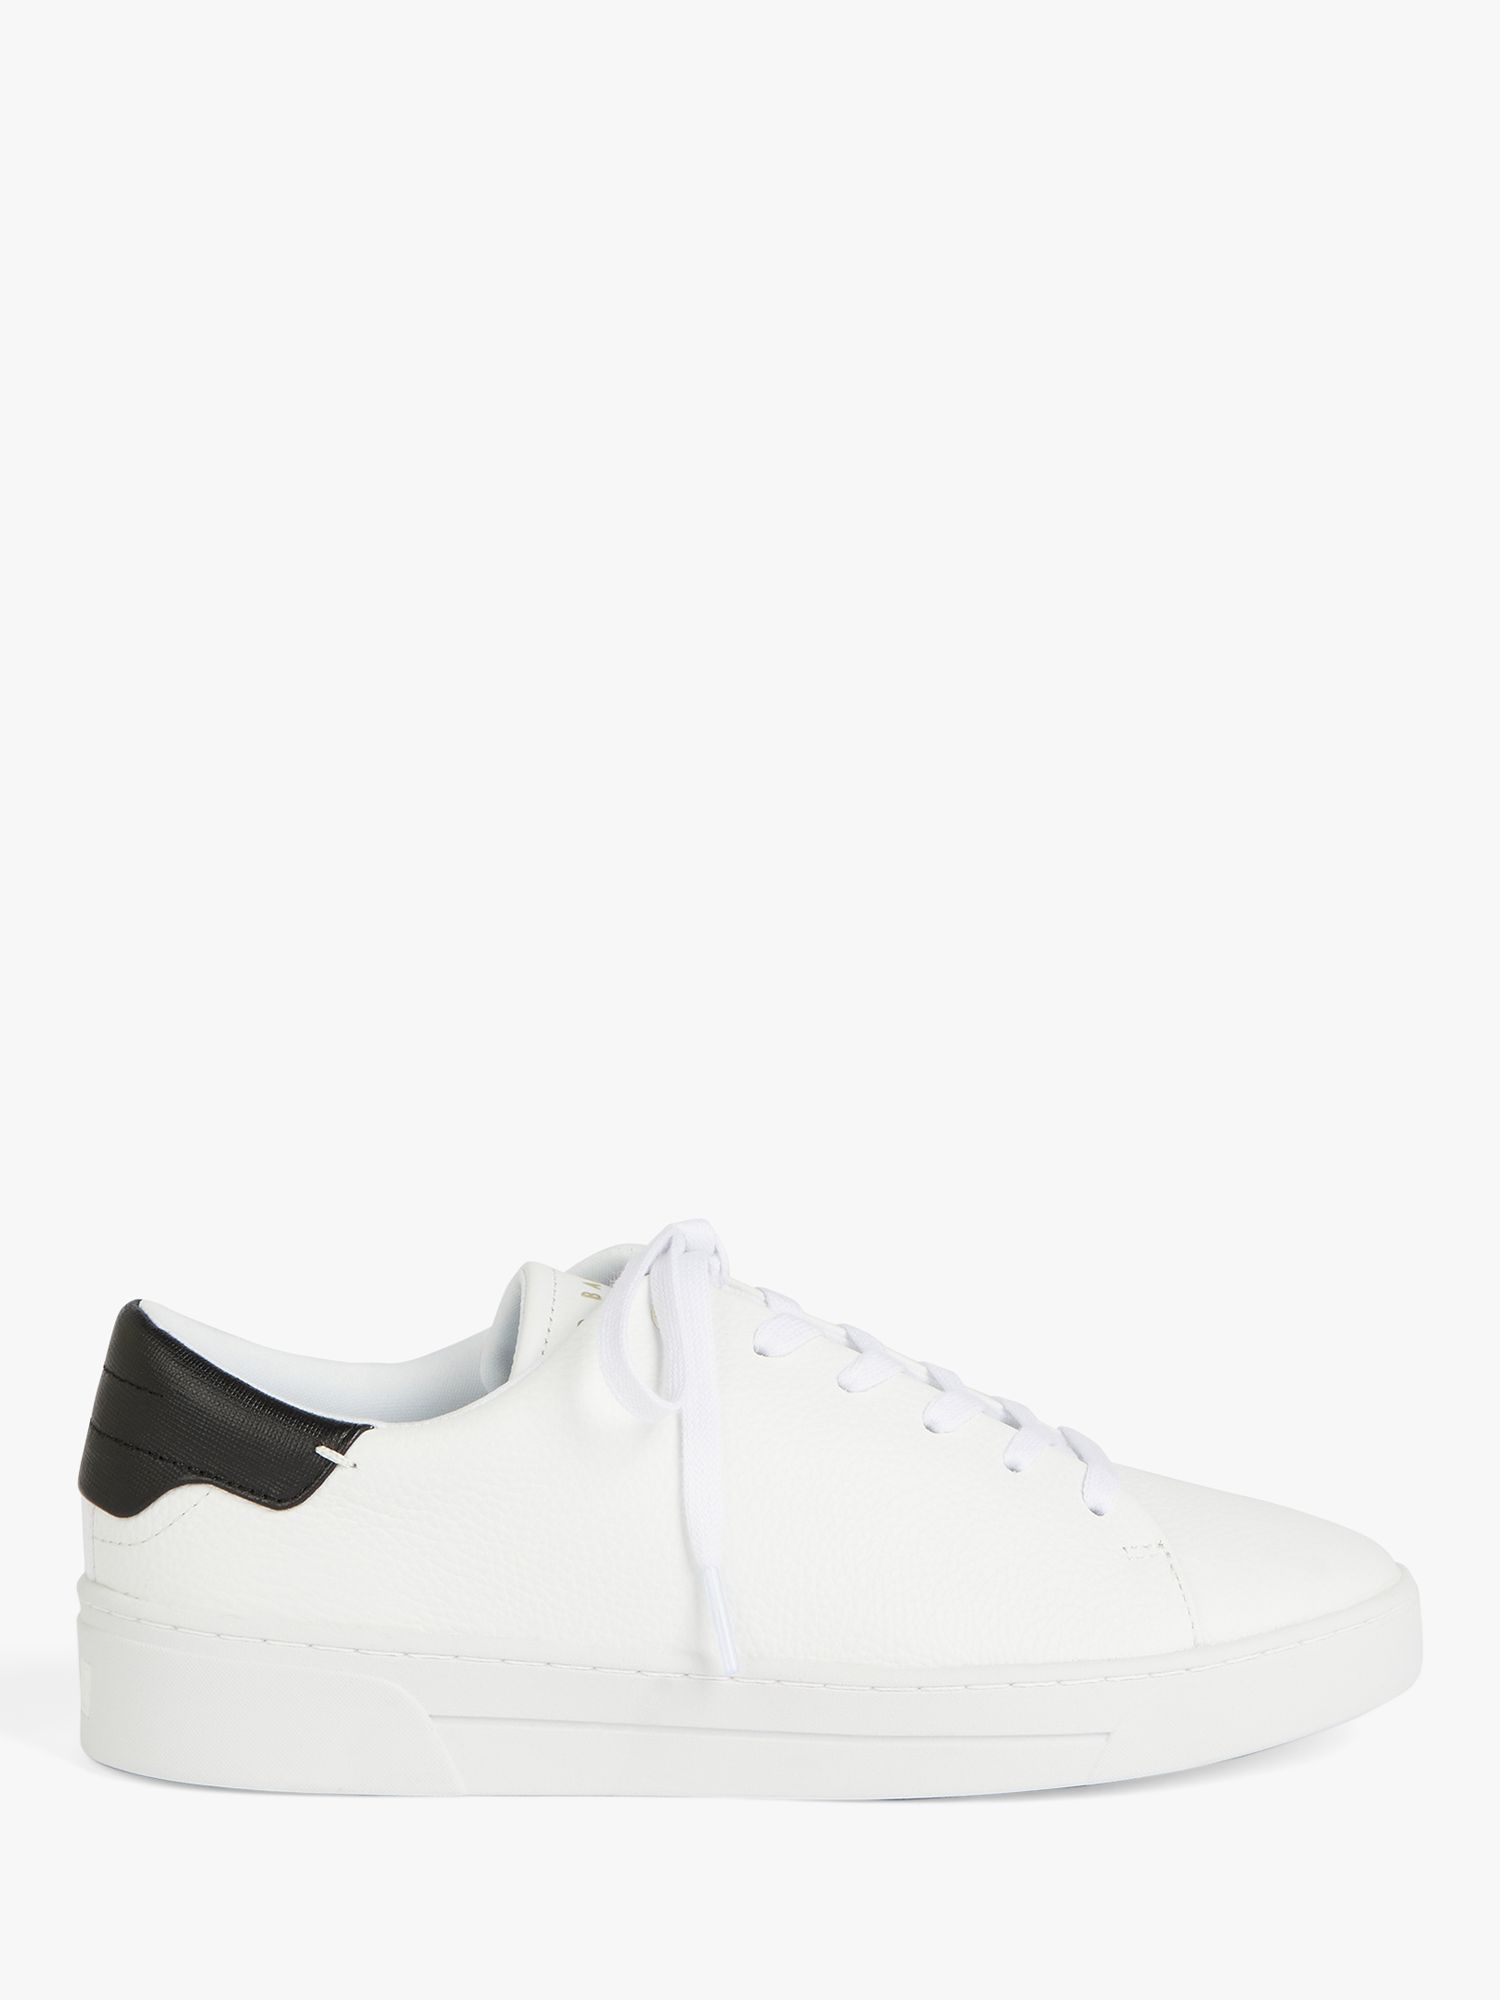 Ted Baker Tumbled Leather Low Top Trainers, White/Black, 3